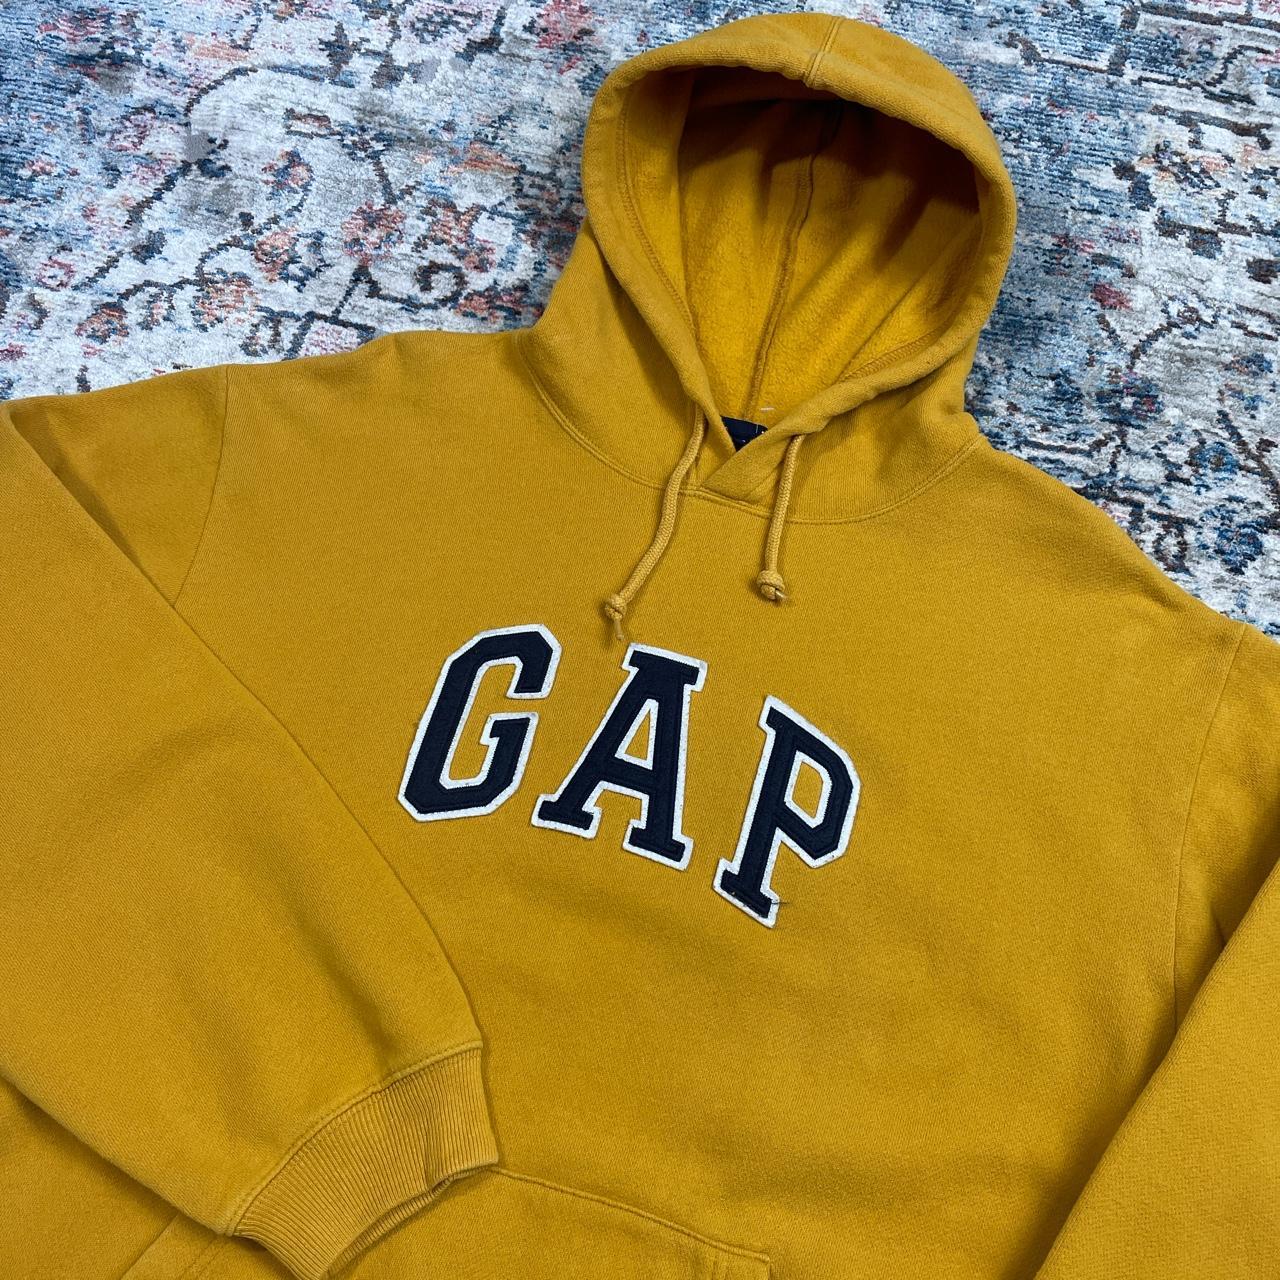 Vintage Yellow Embroidered GAP Spellout Hoodie